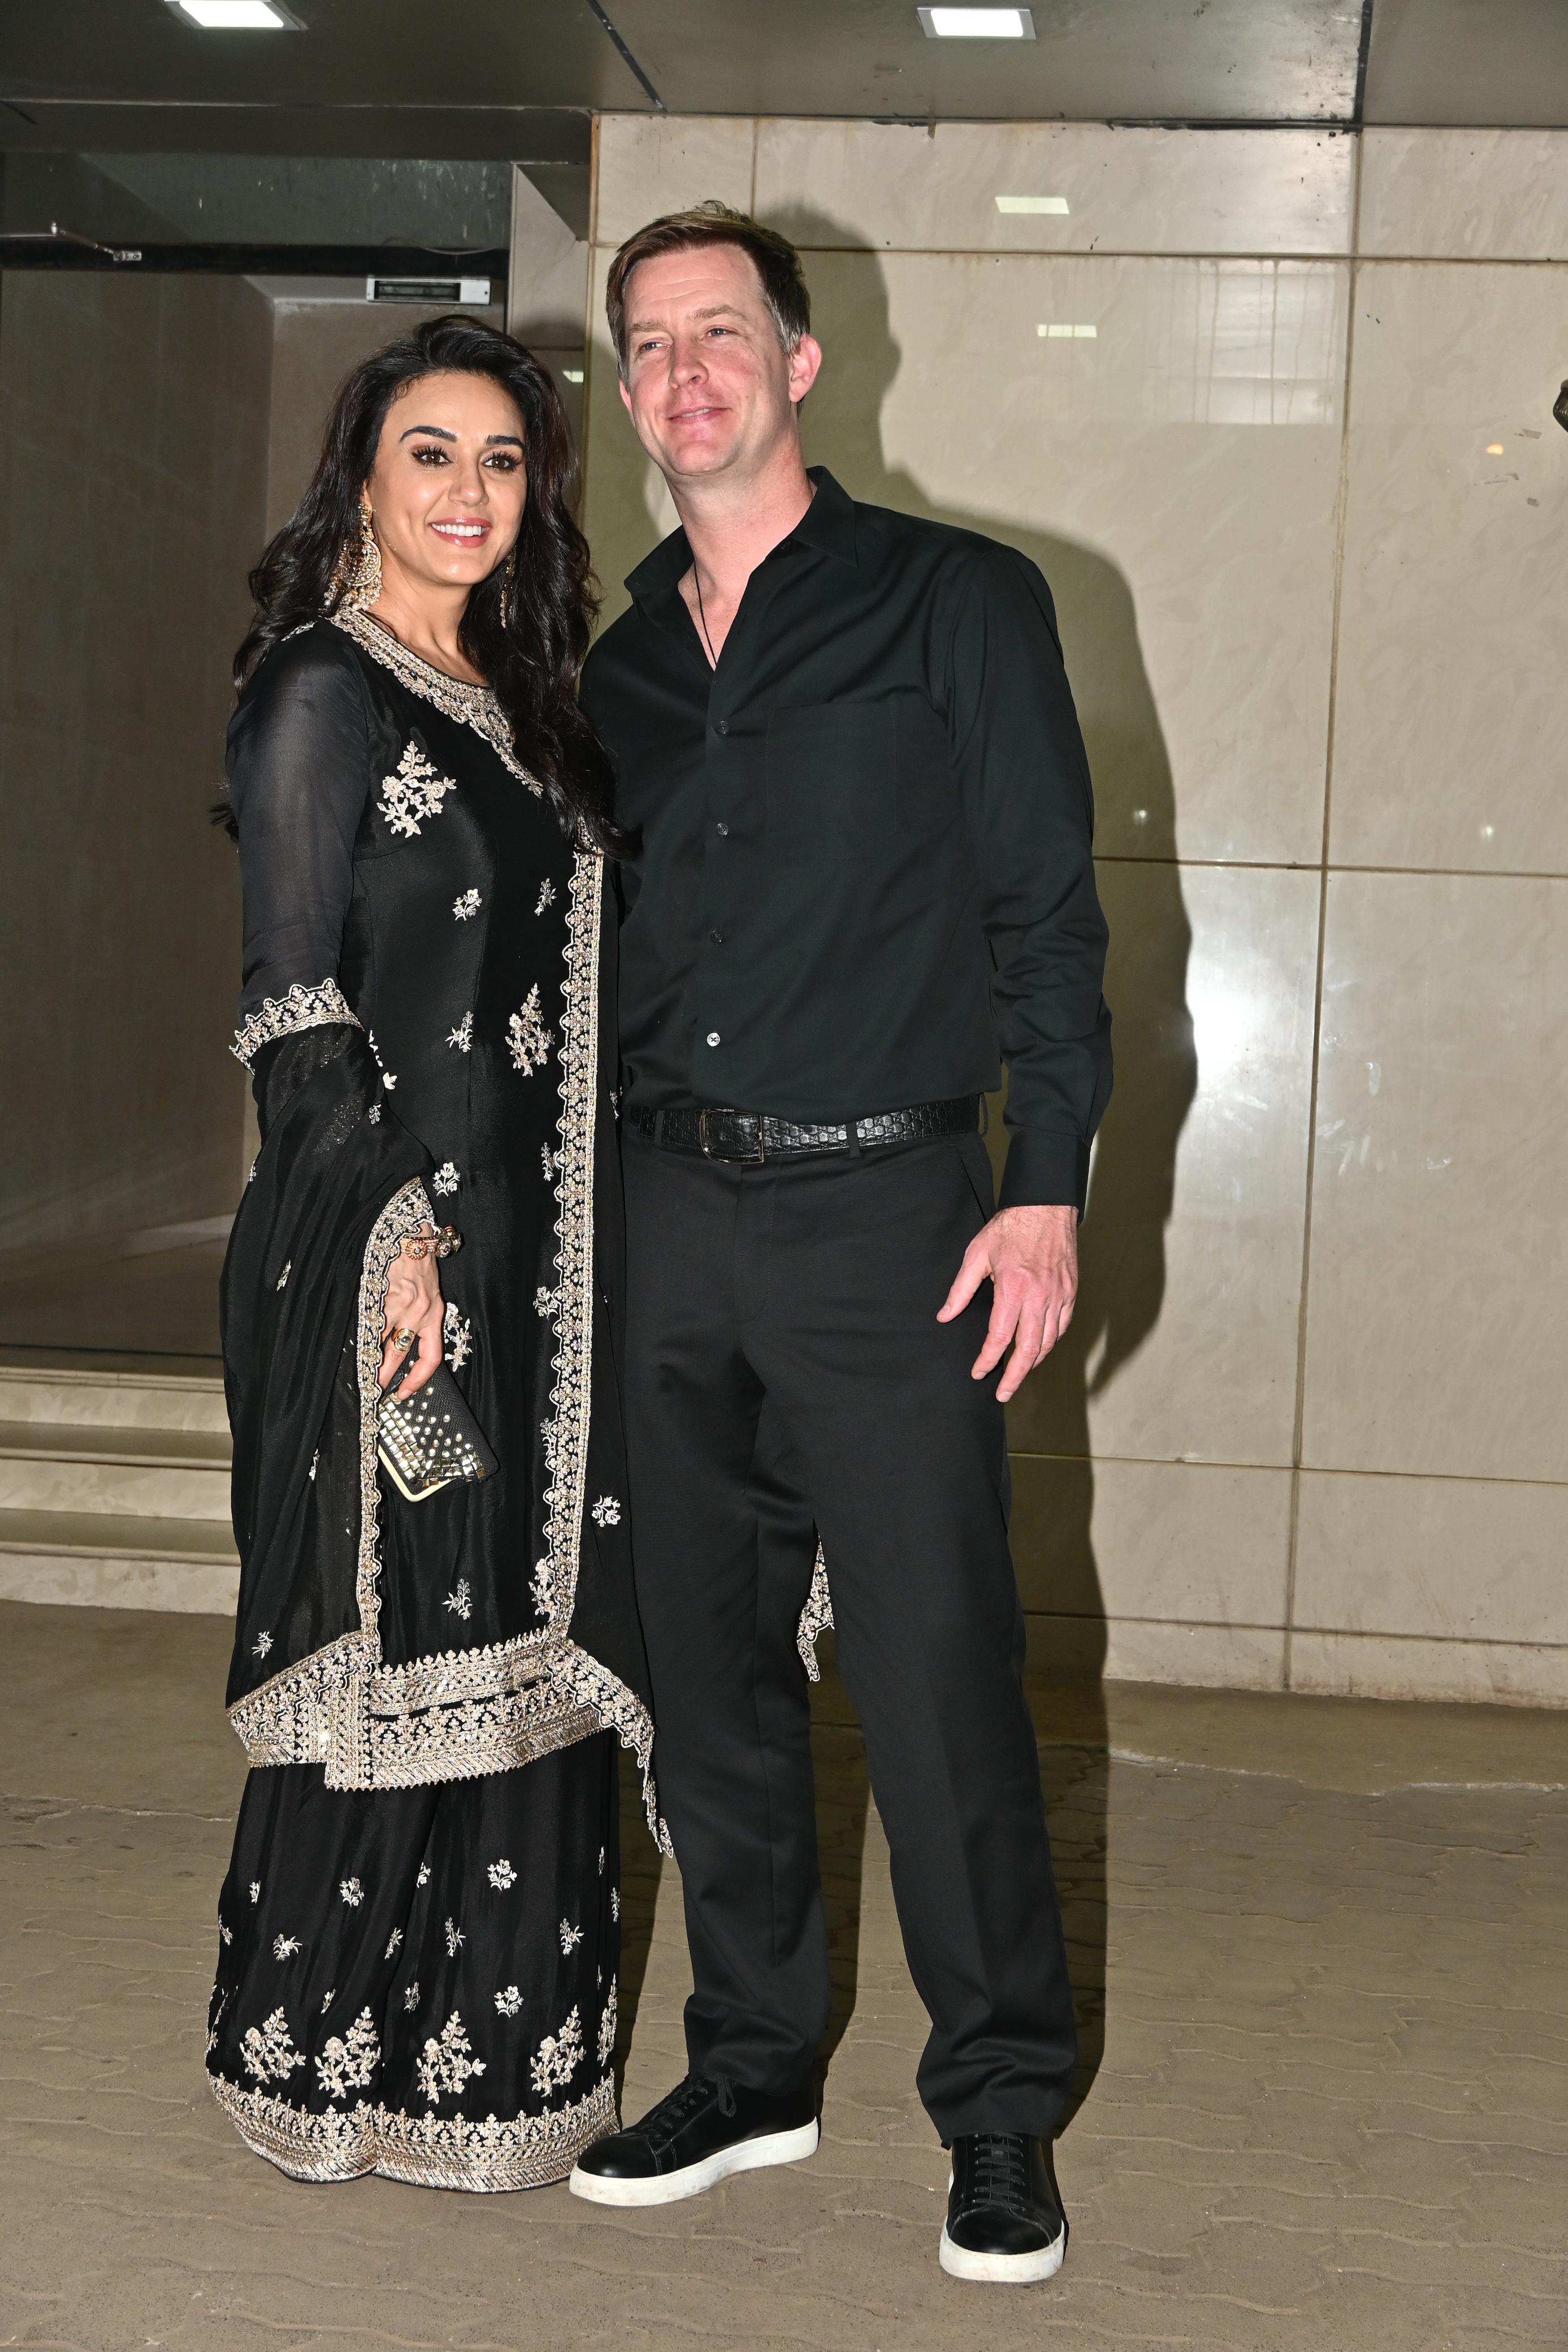 Preity Zinta and Gene Goodenough were also snapped as they attended the Eid party. Preity Zinta looked stunning in a black kurta while her husband complimented her in matching pant and shirt